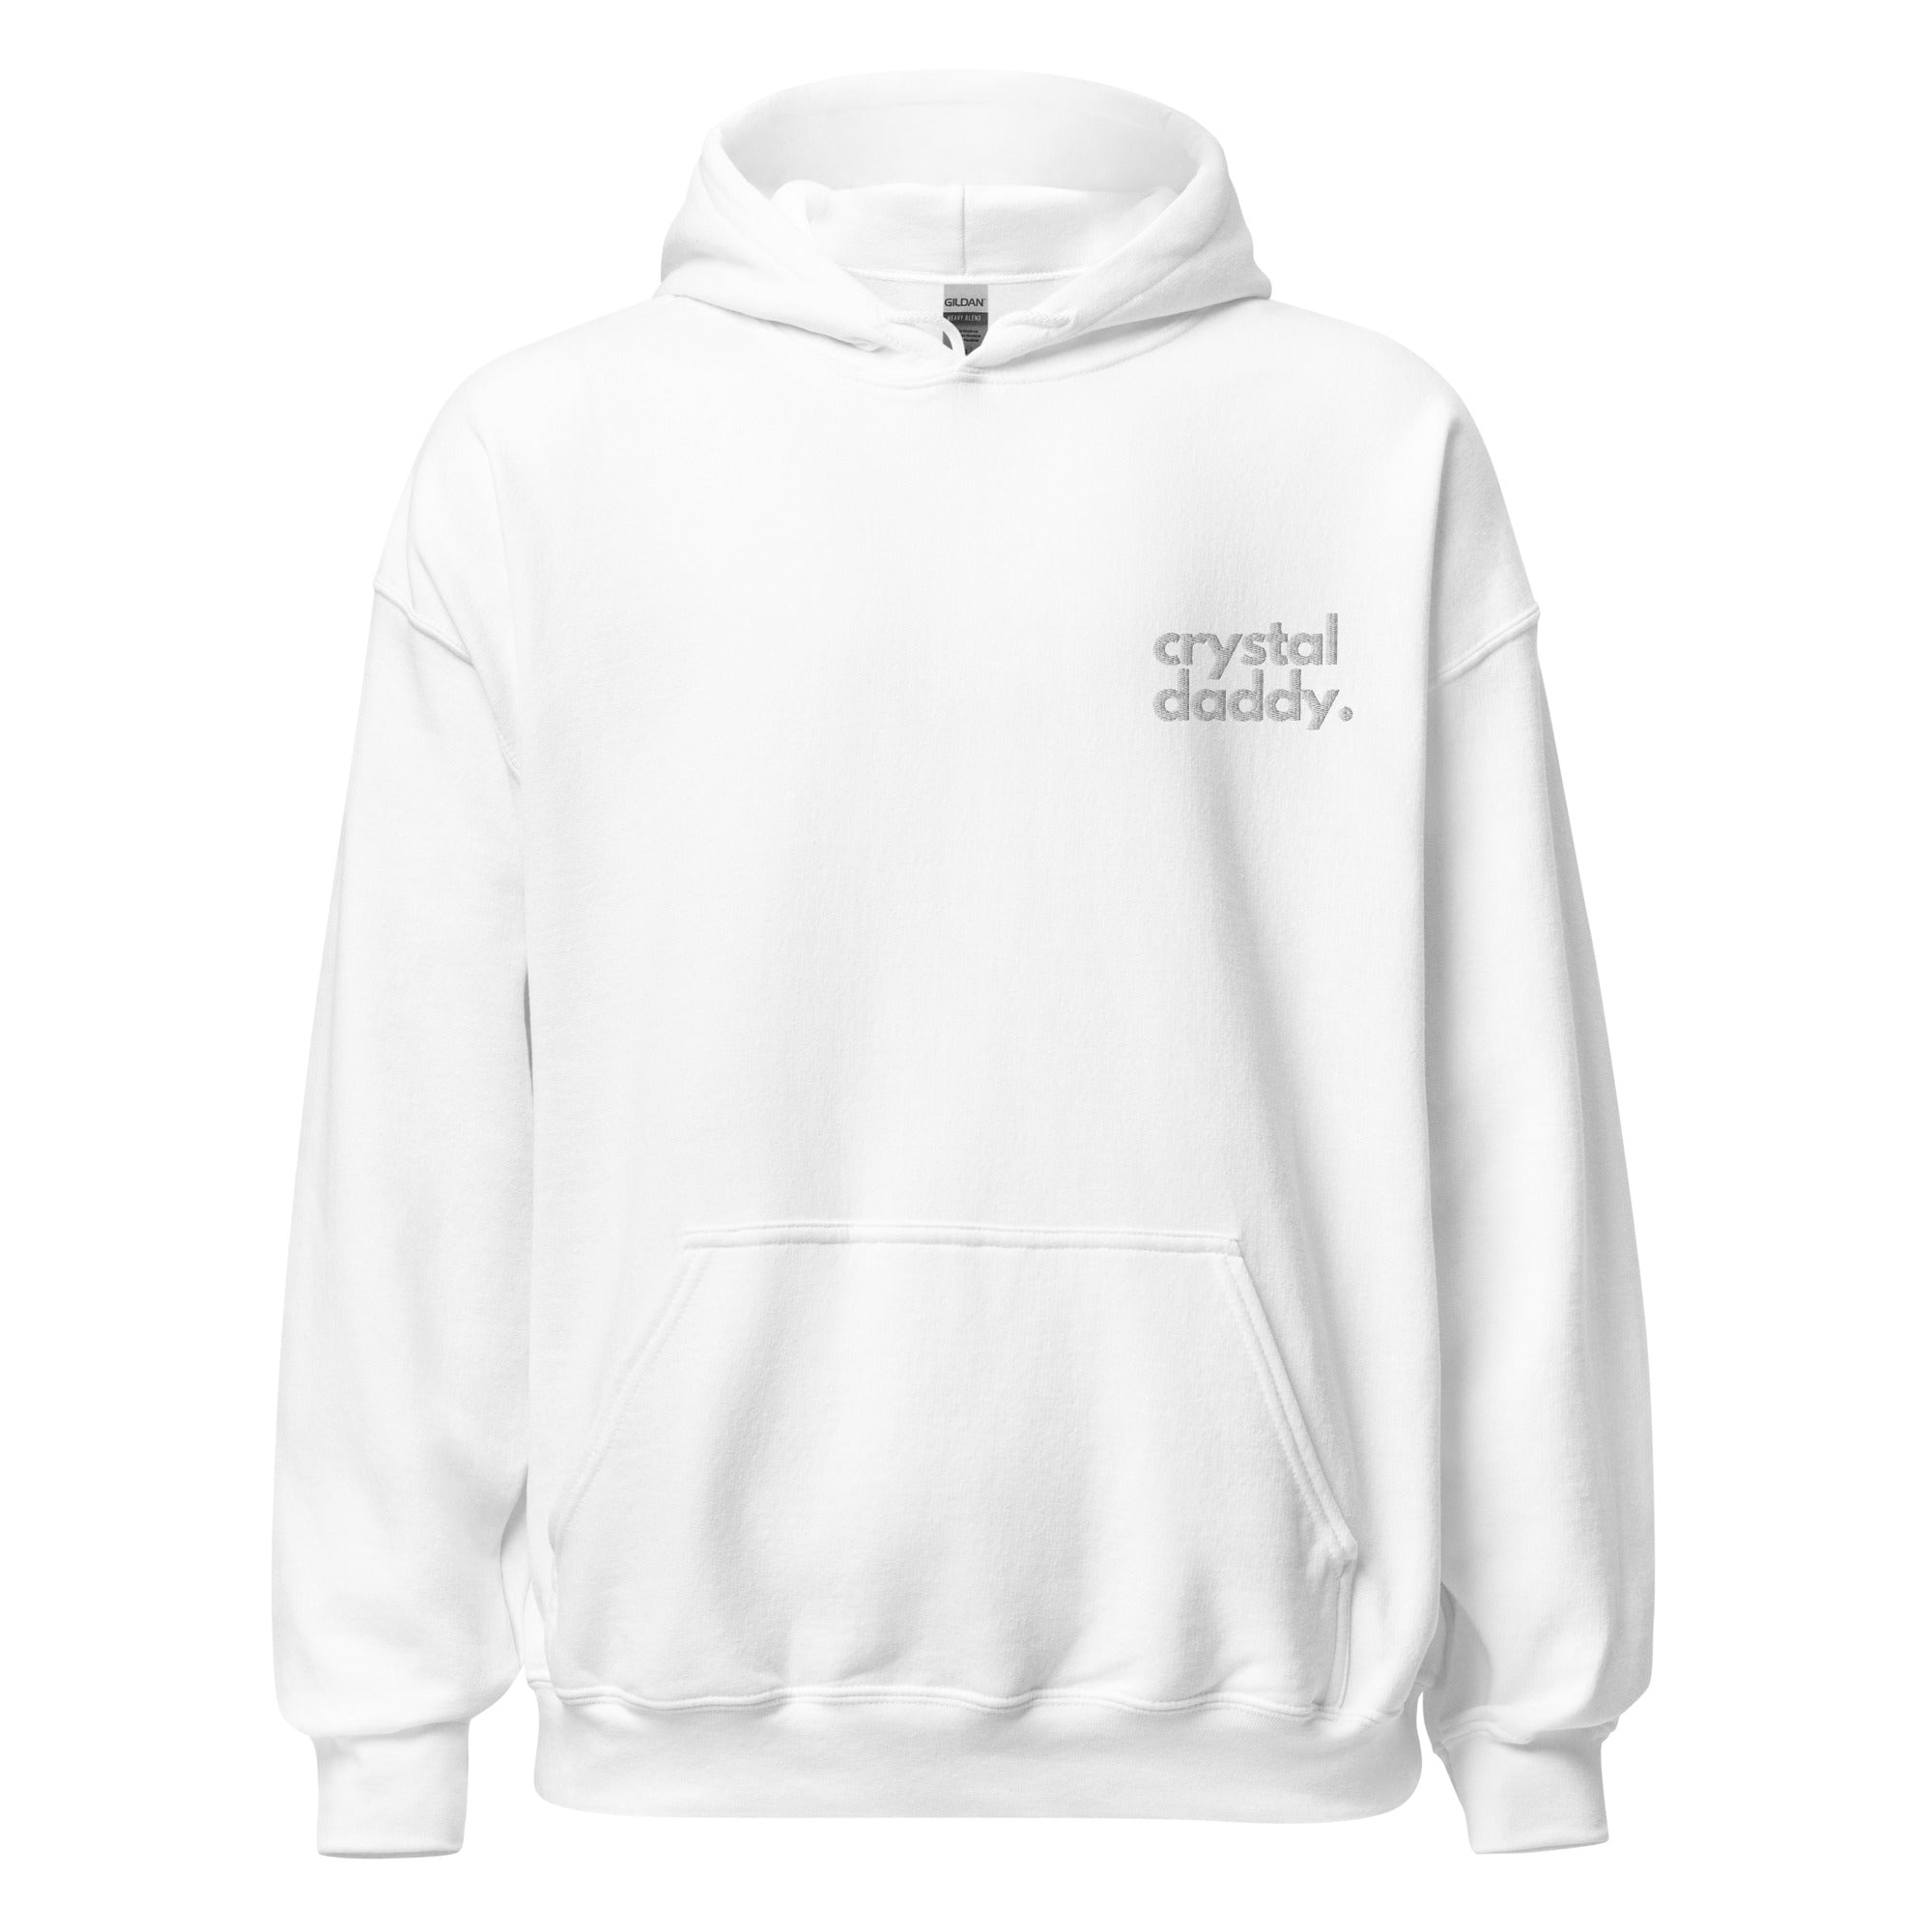 Crystal Daddy Hoodie (White Embroidery)